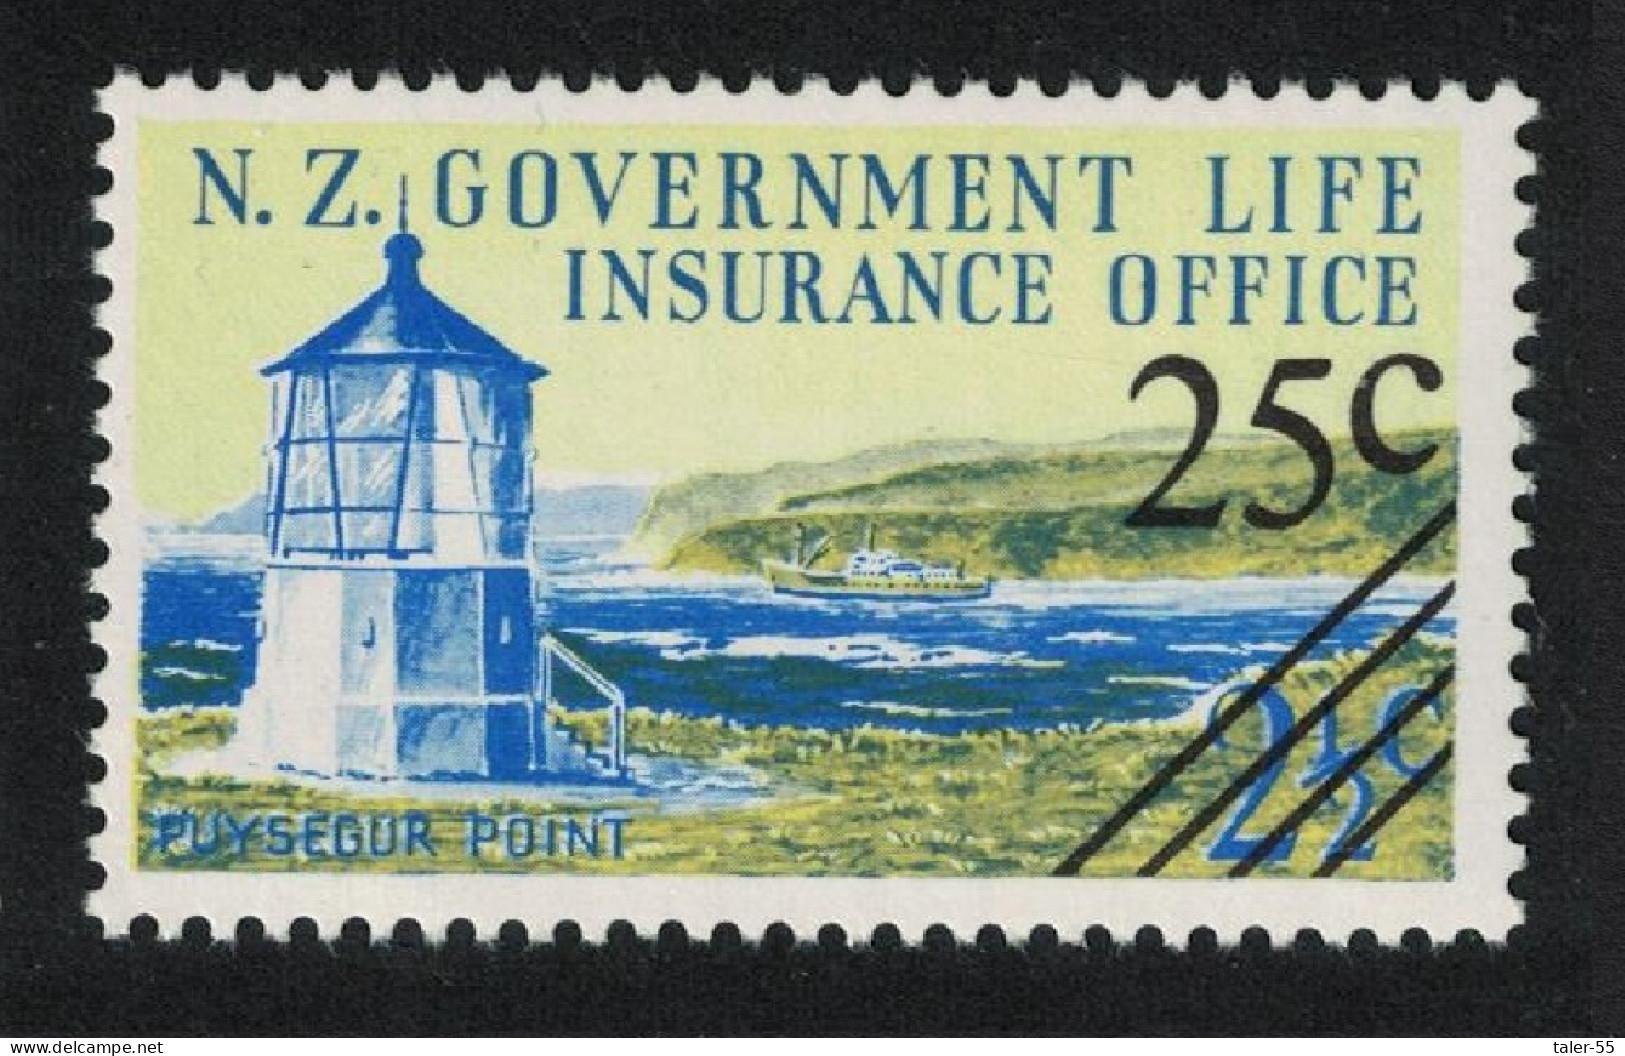 New Zealand Lighthouse Overprint 1978 MNH SG#L63 - Unused Stamps